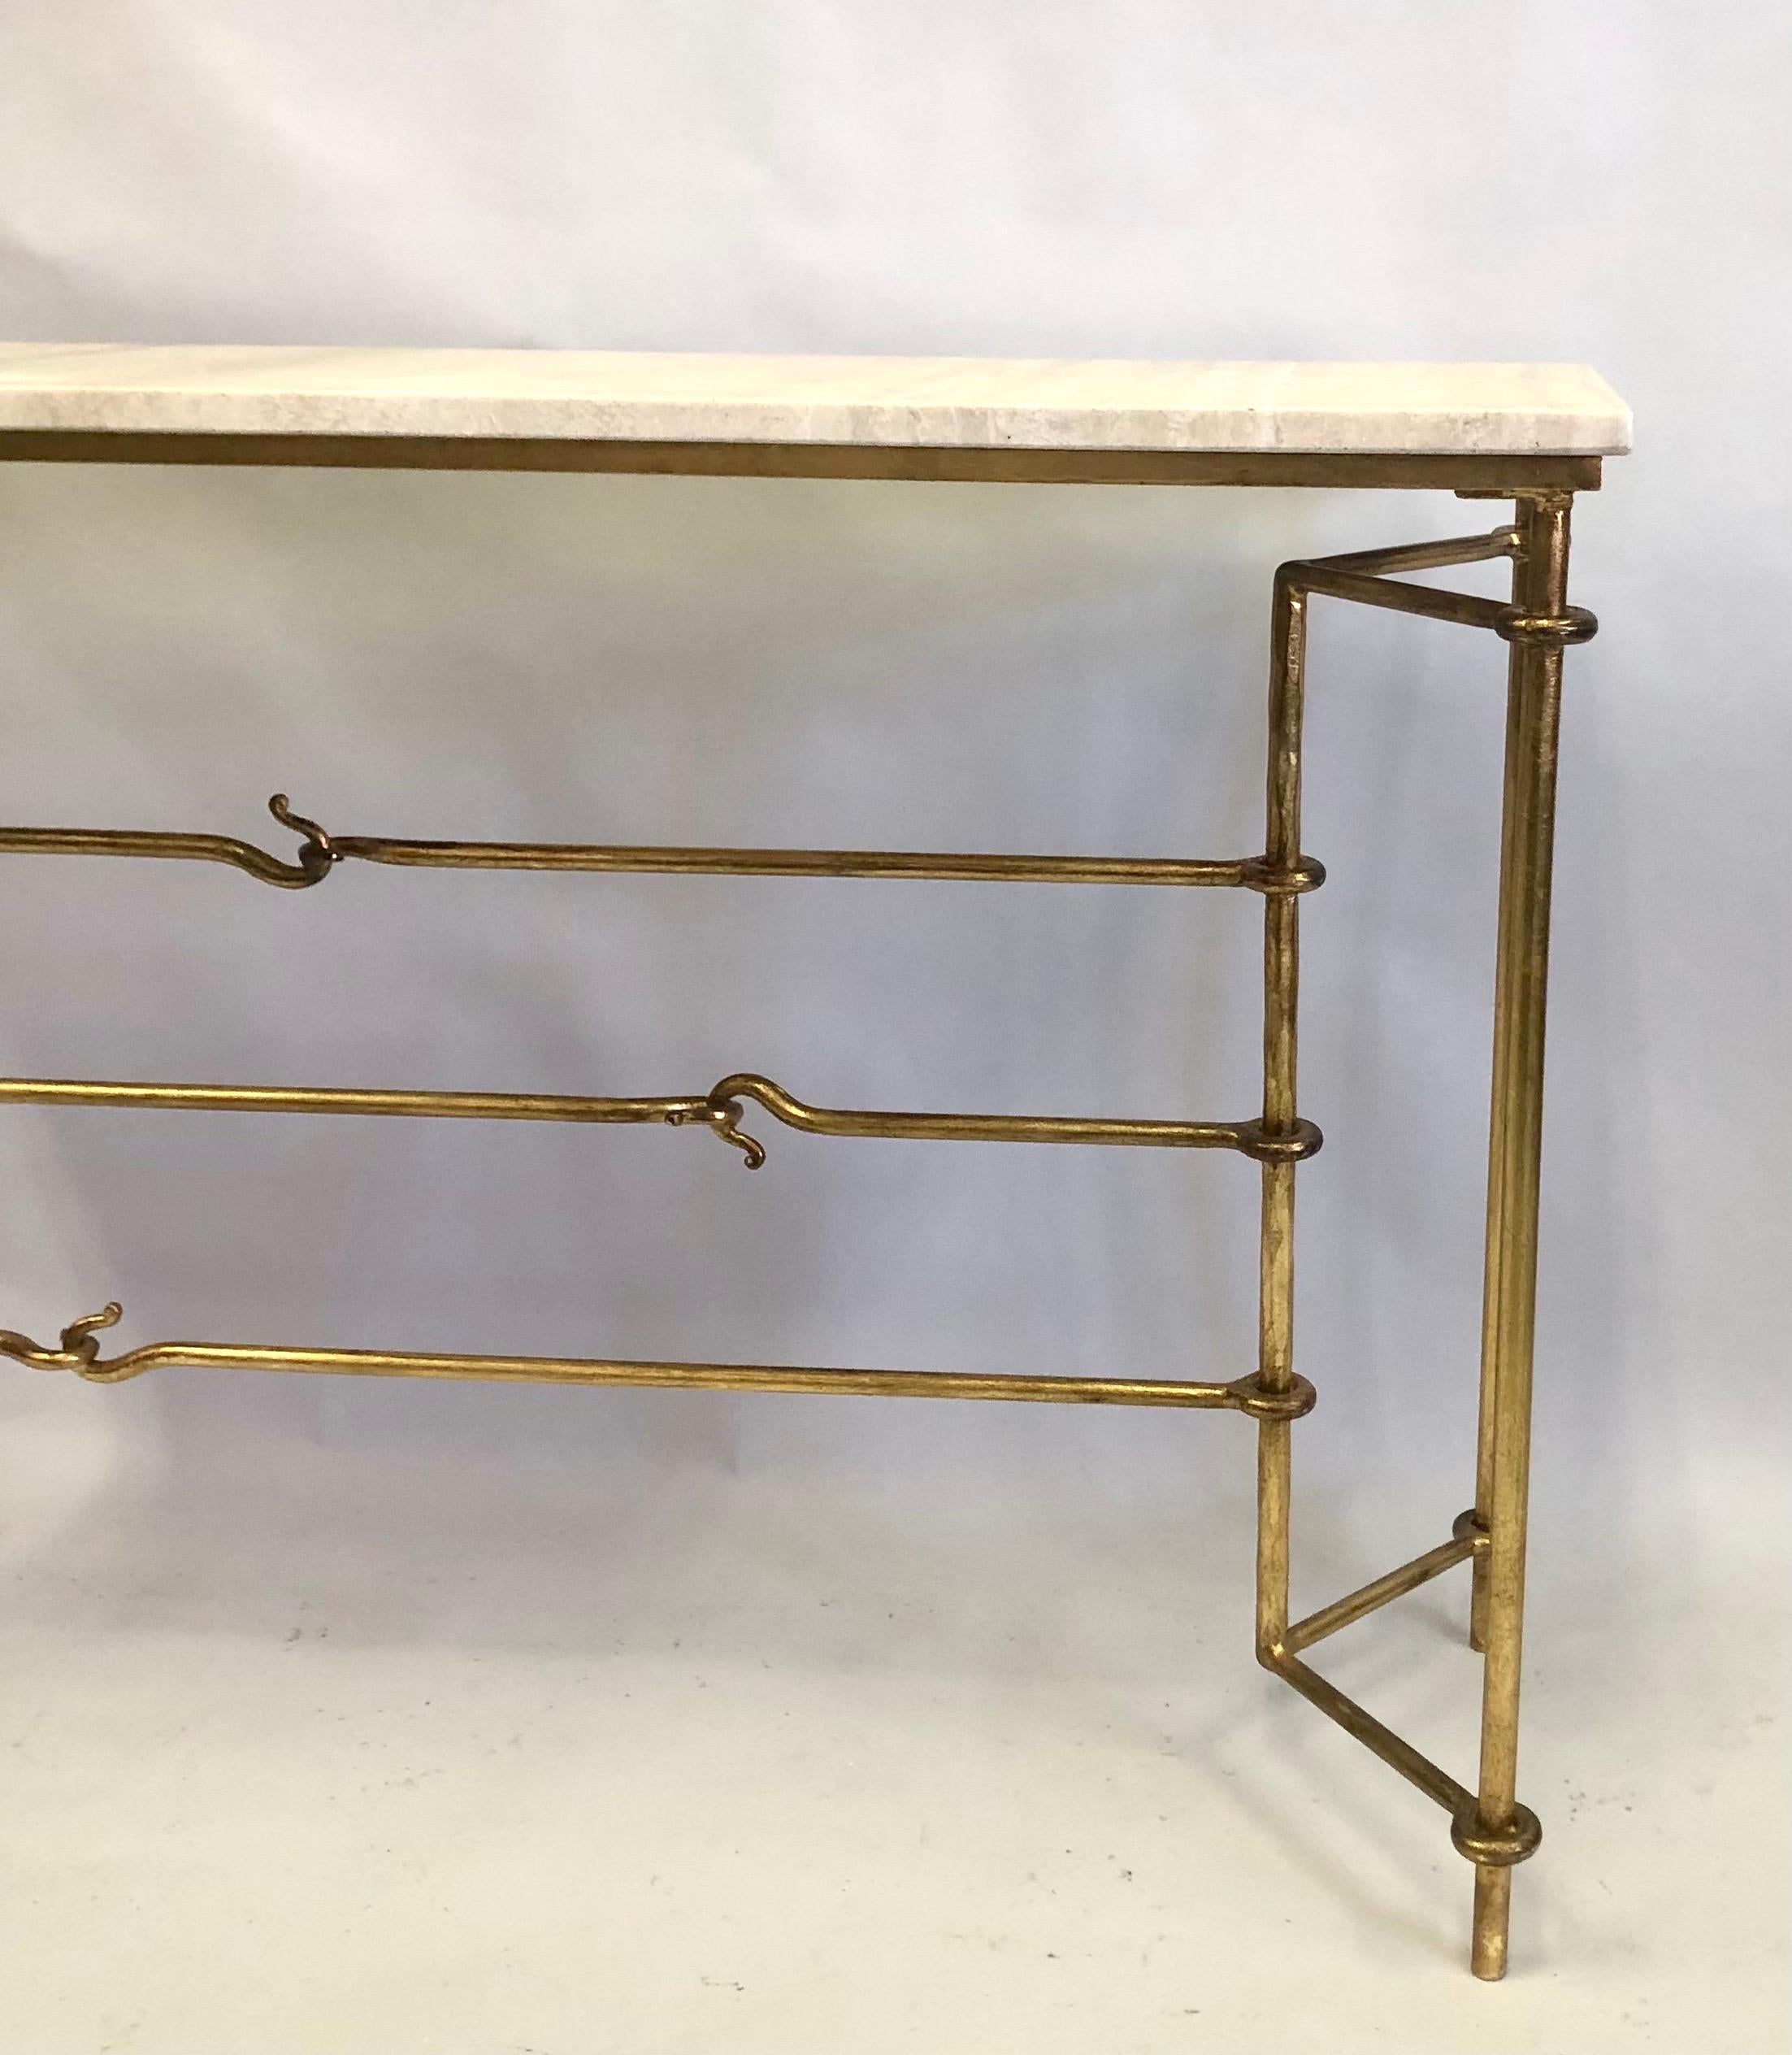 Italian Mid-Century Modern Neoclassical Gilt Iron Console by Banci for Hermès For Sale 4